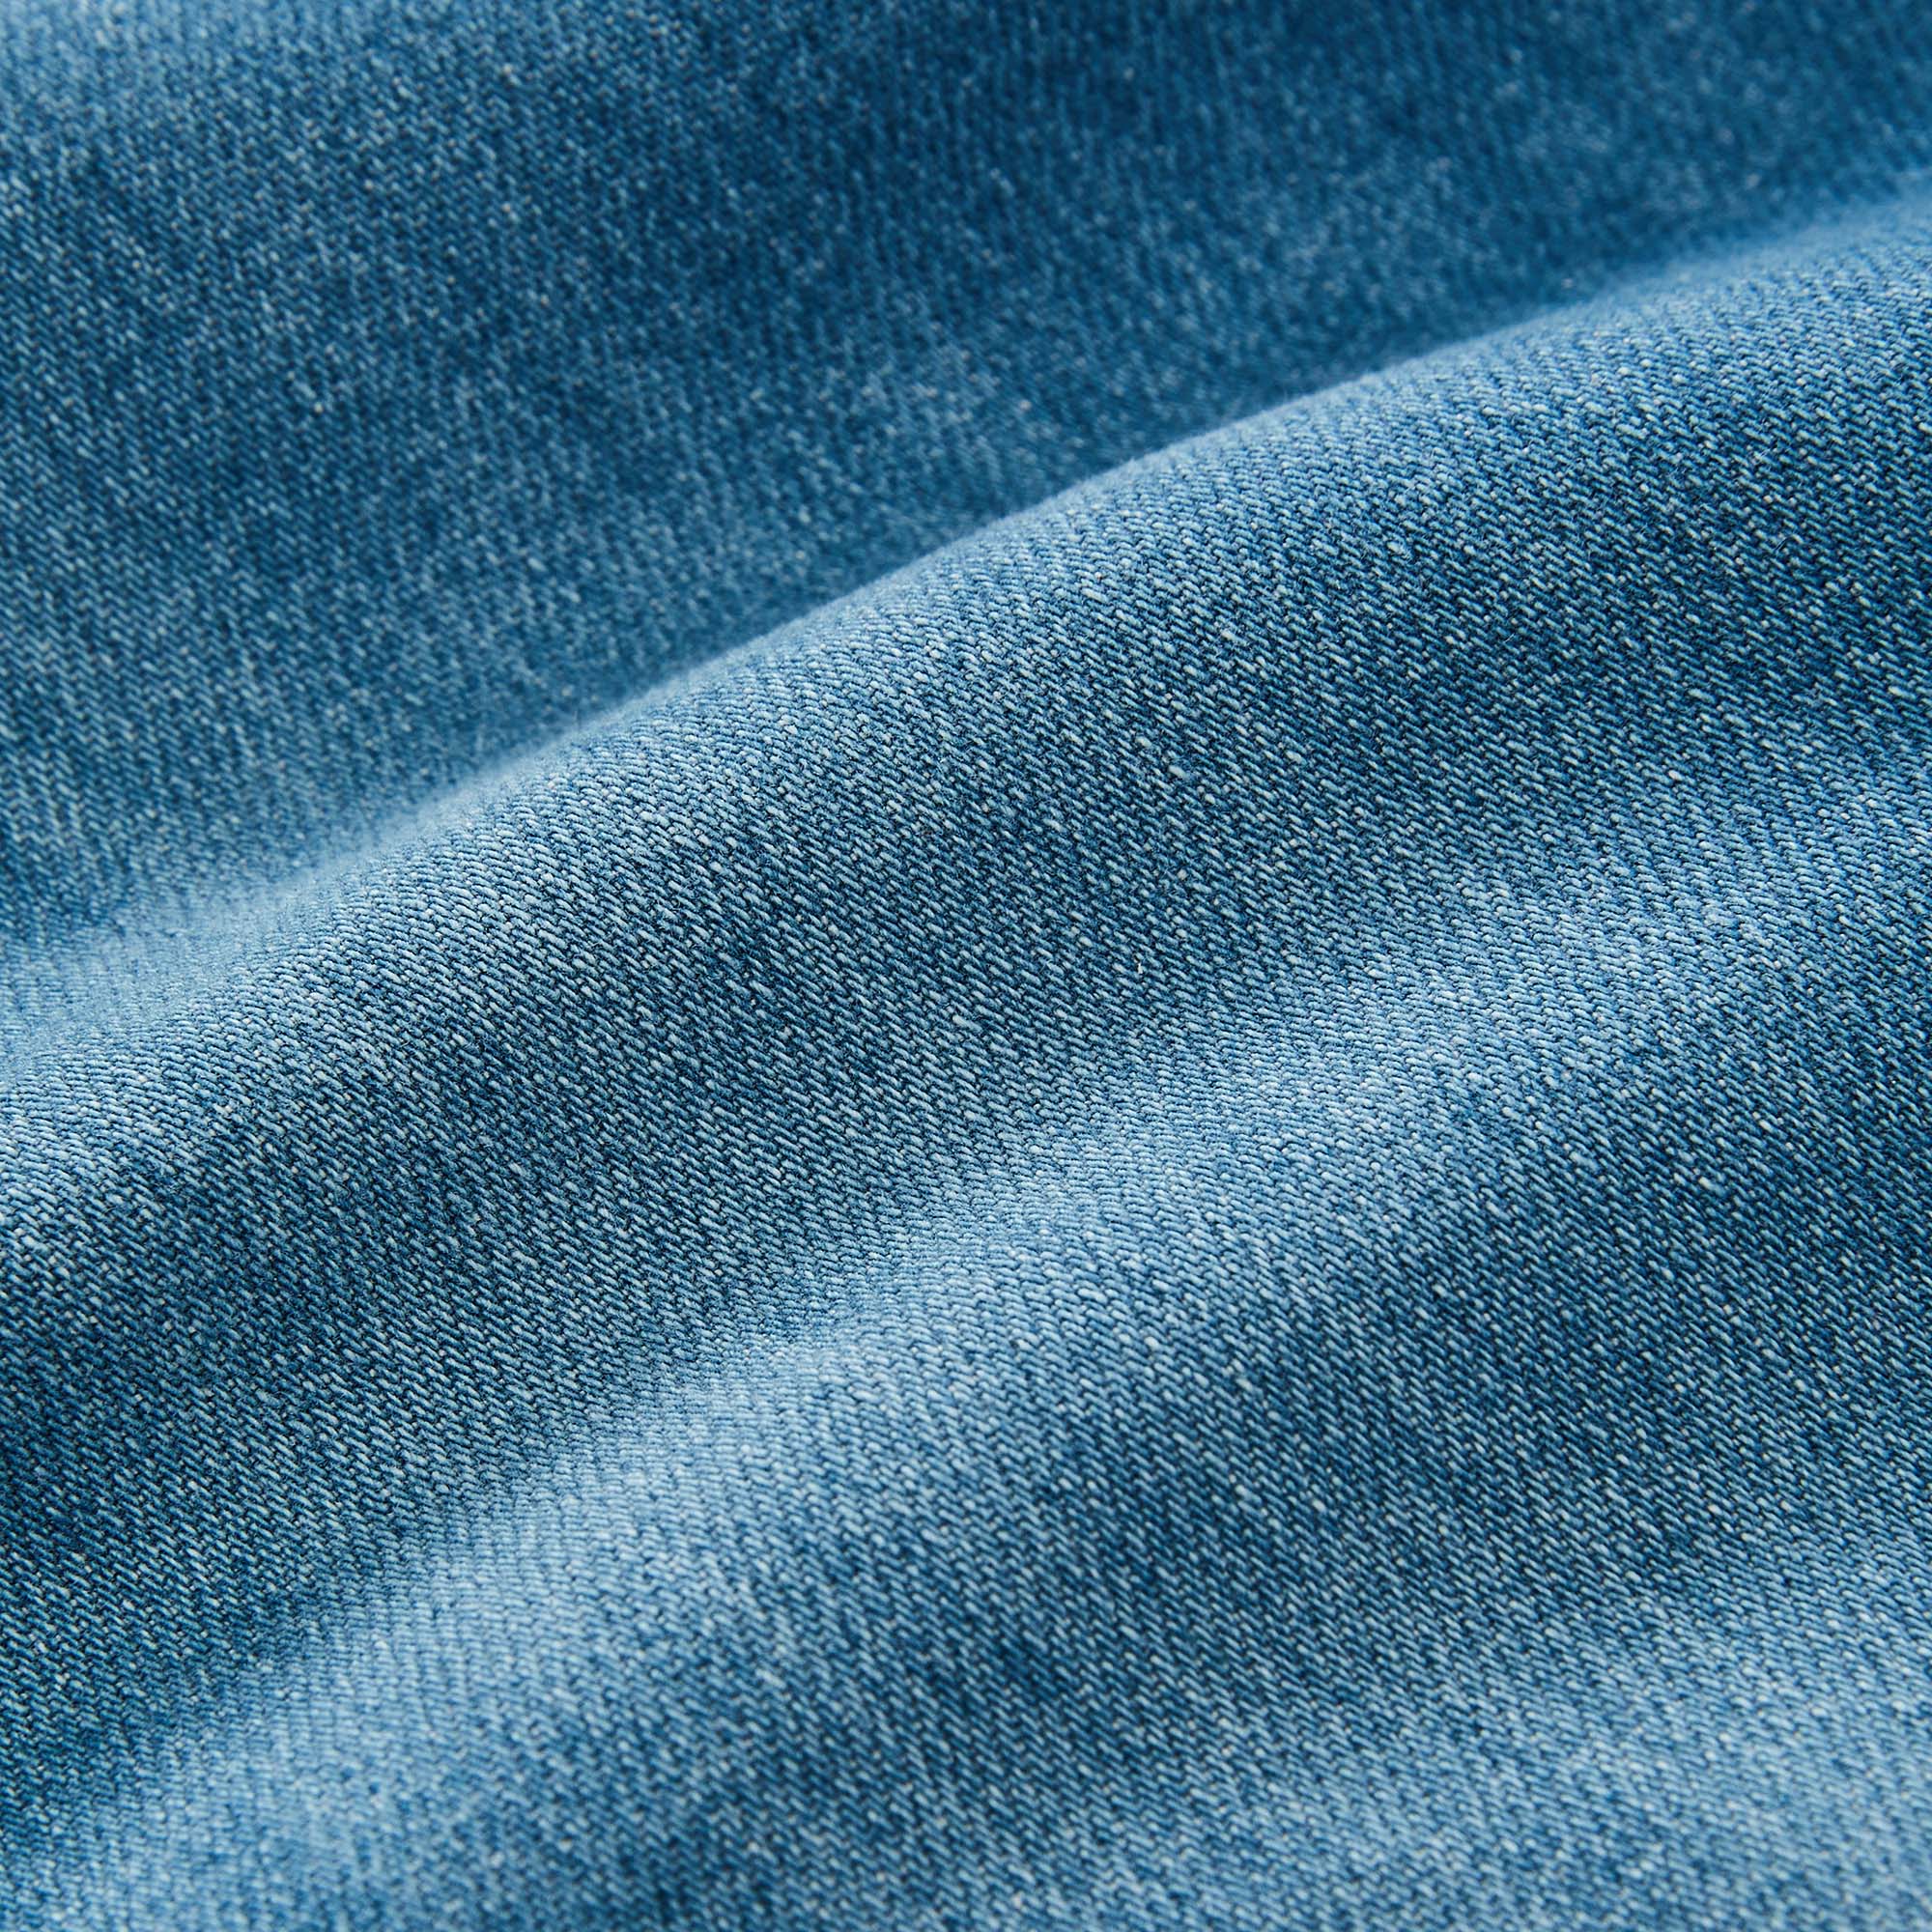 What is denim and why is it called 'denim'? Denim FAQ by Denimhunters